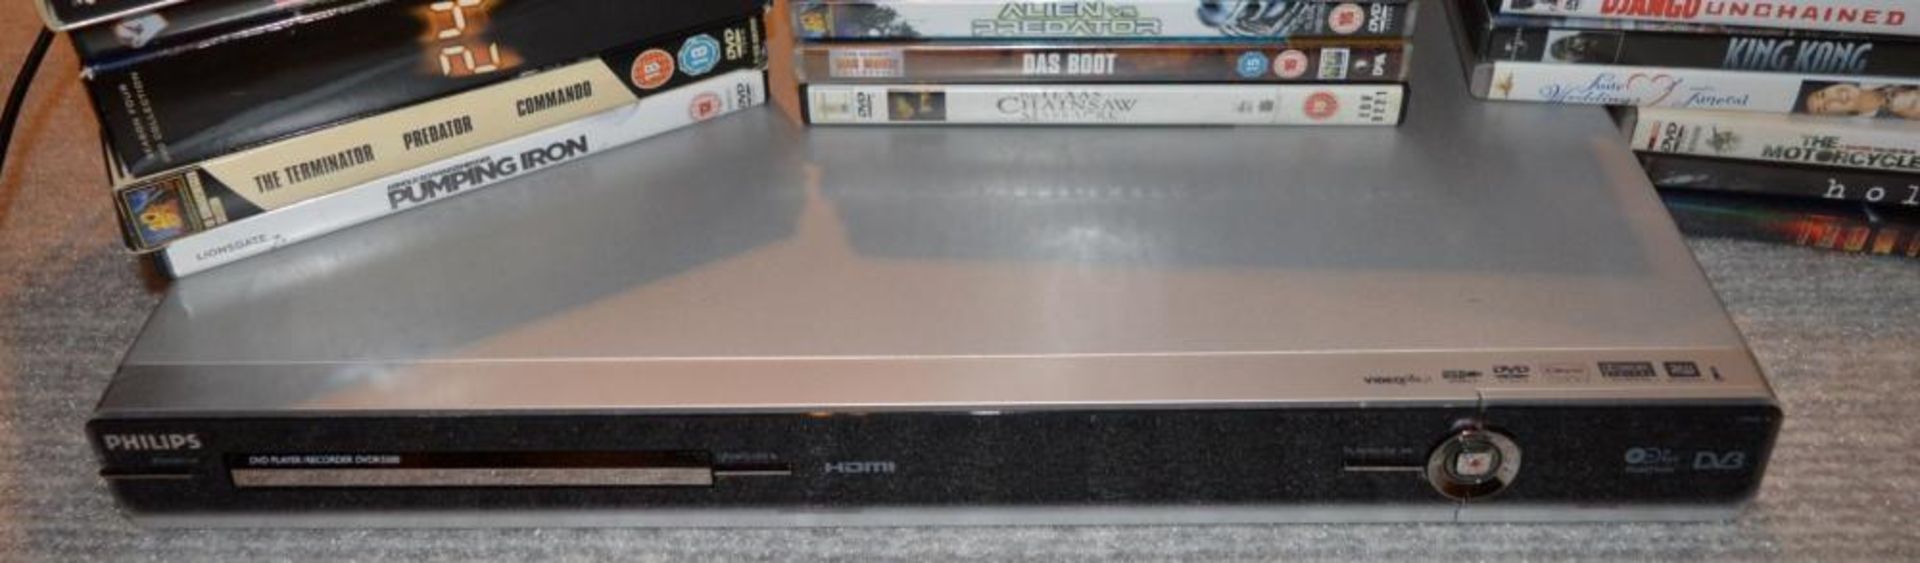 1 x Philips DVDR 5500 DVD Player and Recorder Plus Approx 60 DVD Films and Box Sets - Great - Image 10 of 10